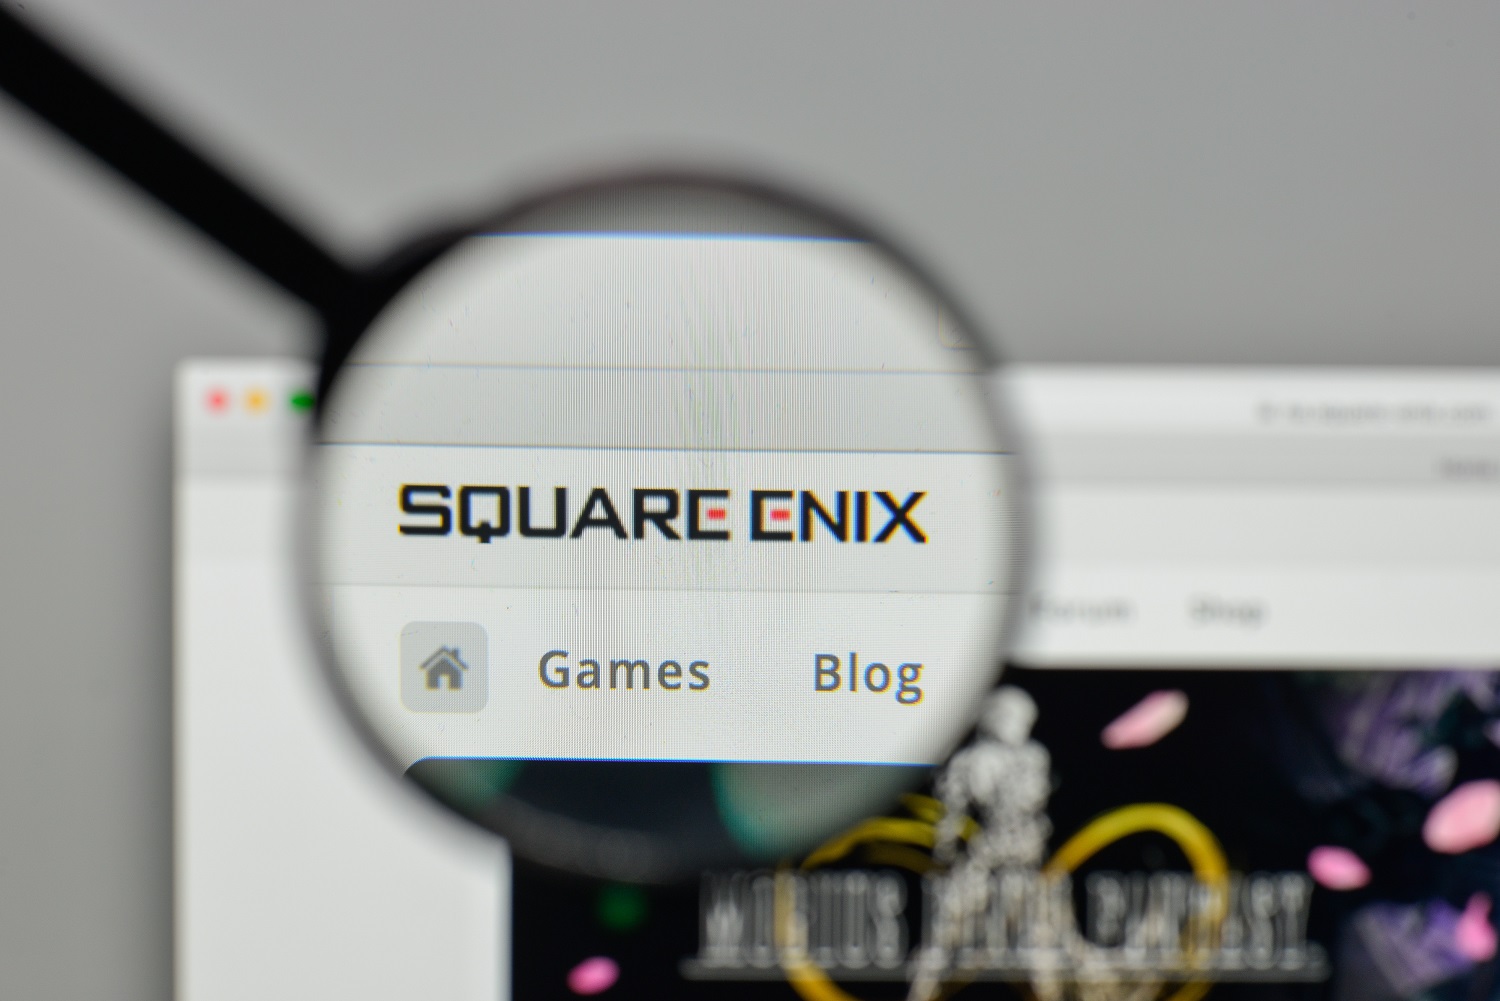 The Square Enix logo on the firm’s website.